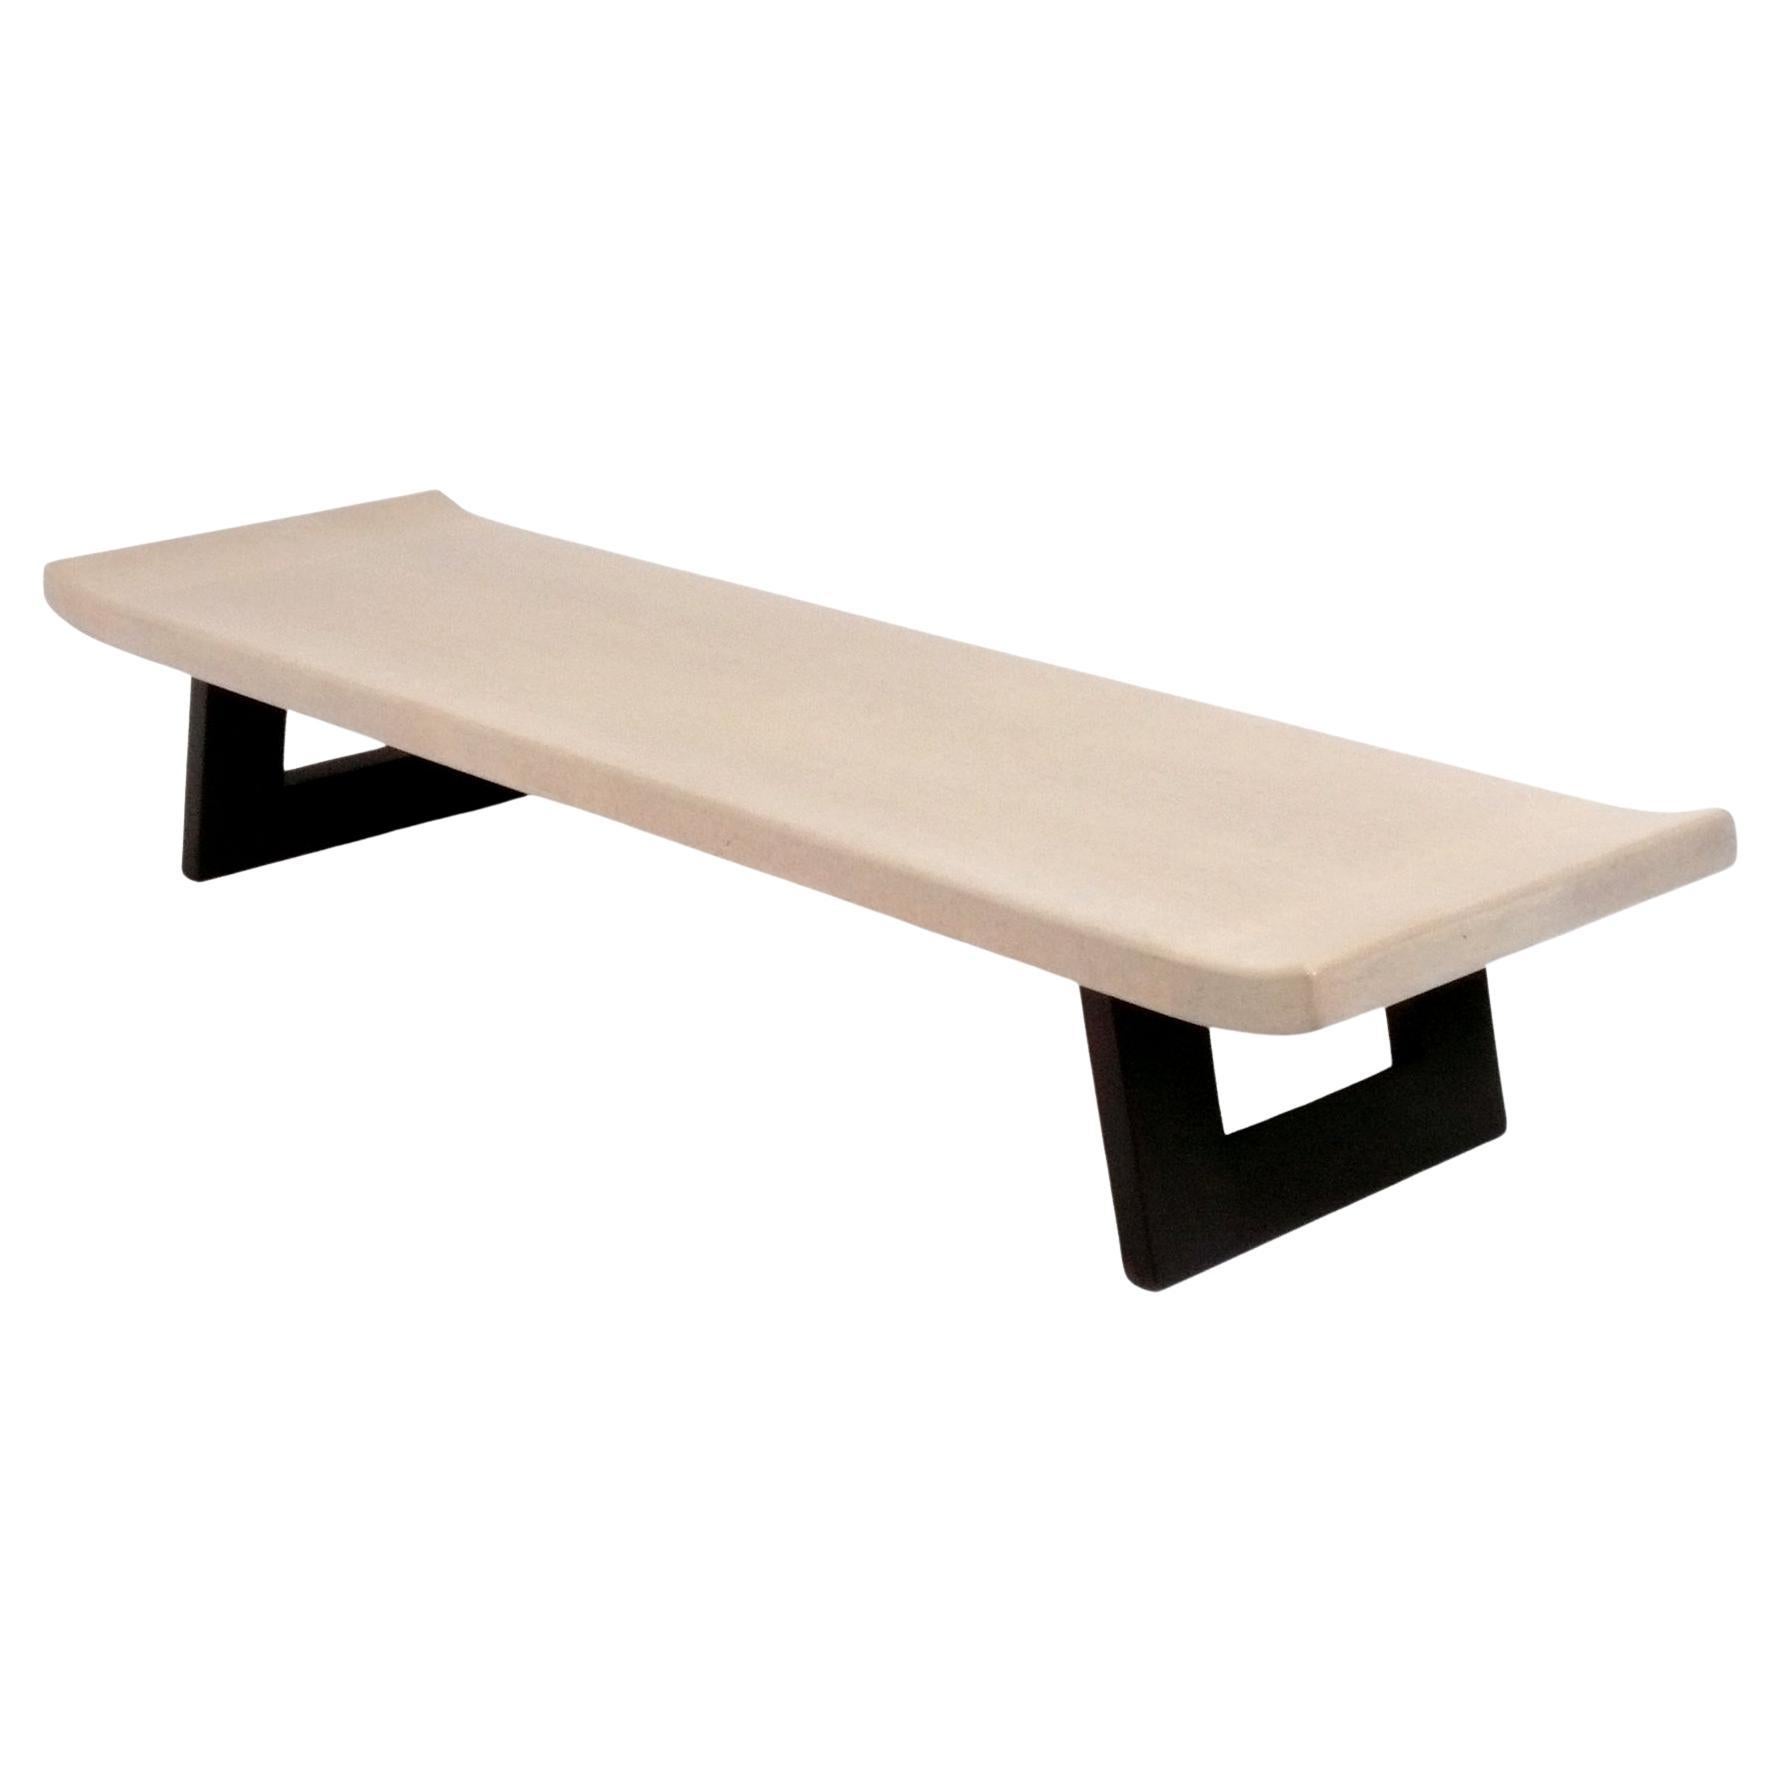 Paul Frankl Cork Top Coffee Table or Bench